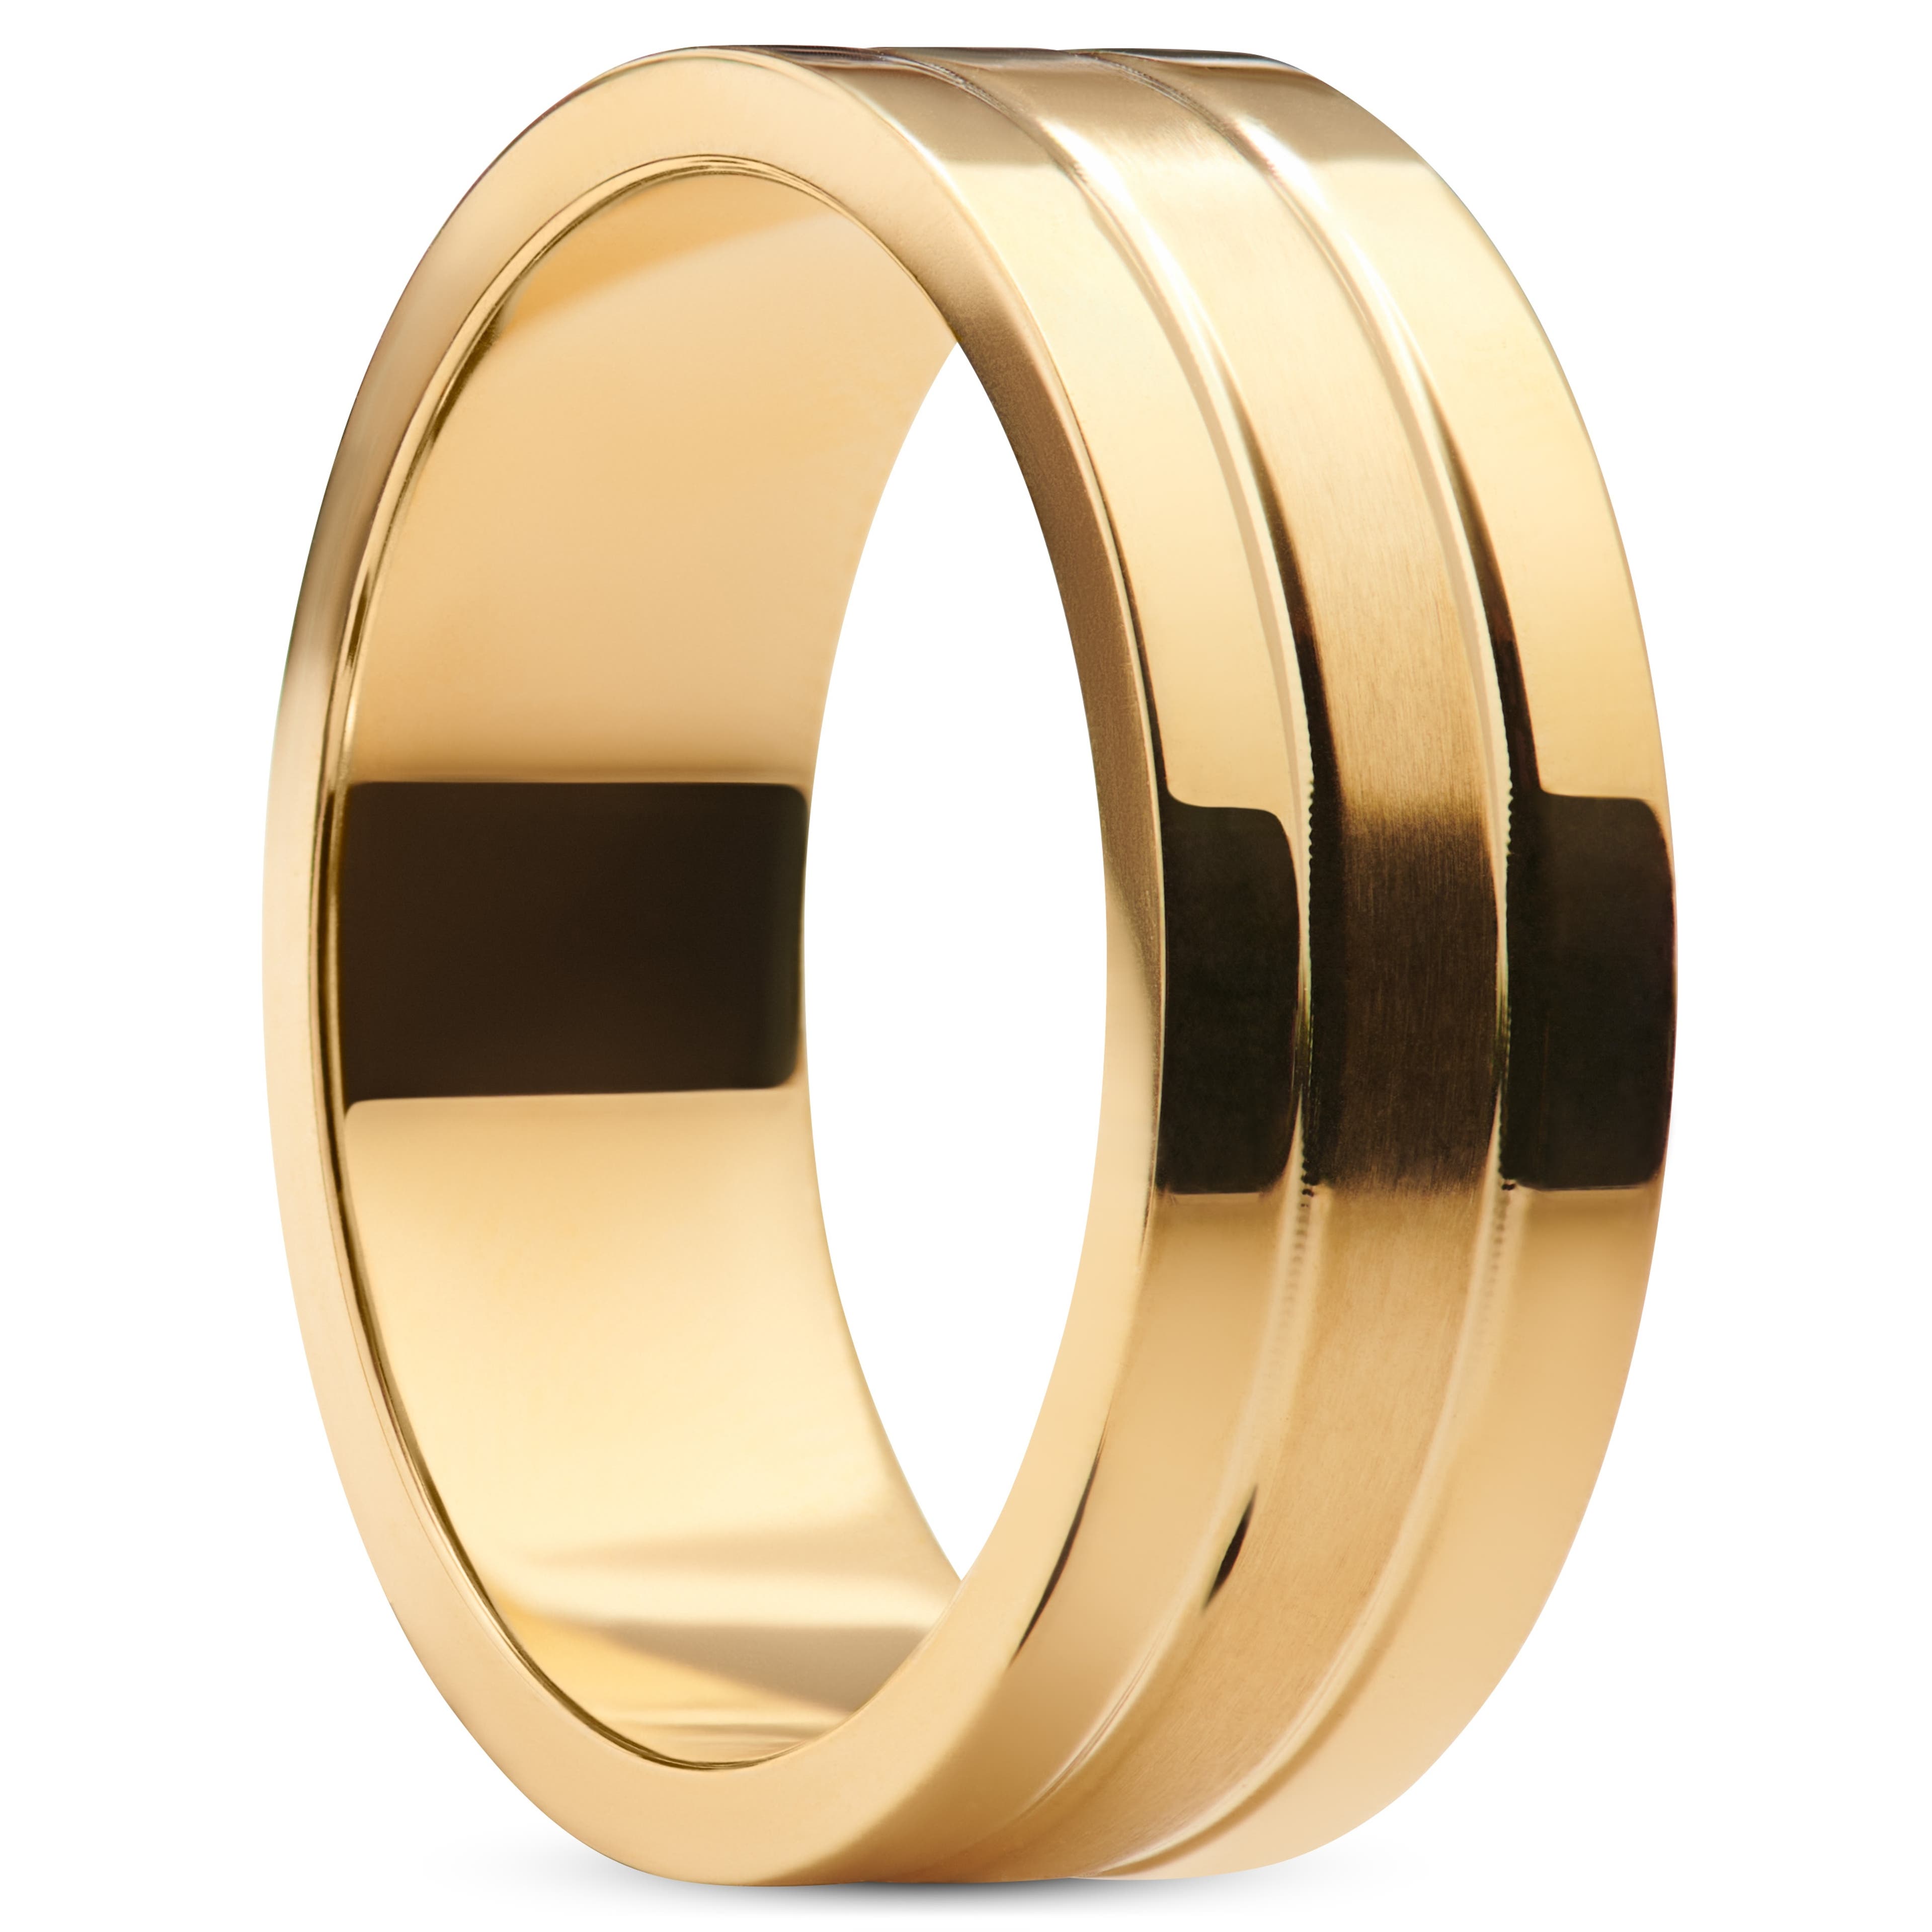 Ferrum | 8 mm Flat Gold-tone Polished & Brushed Stainless Steel Double-grooved Ring